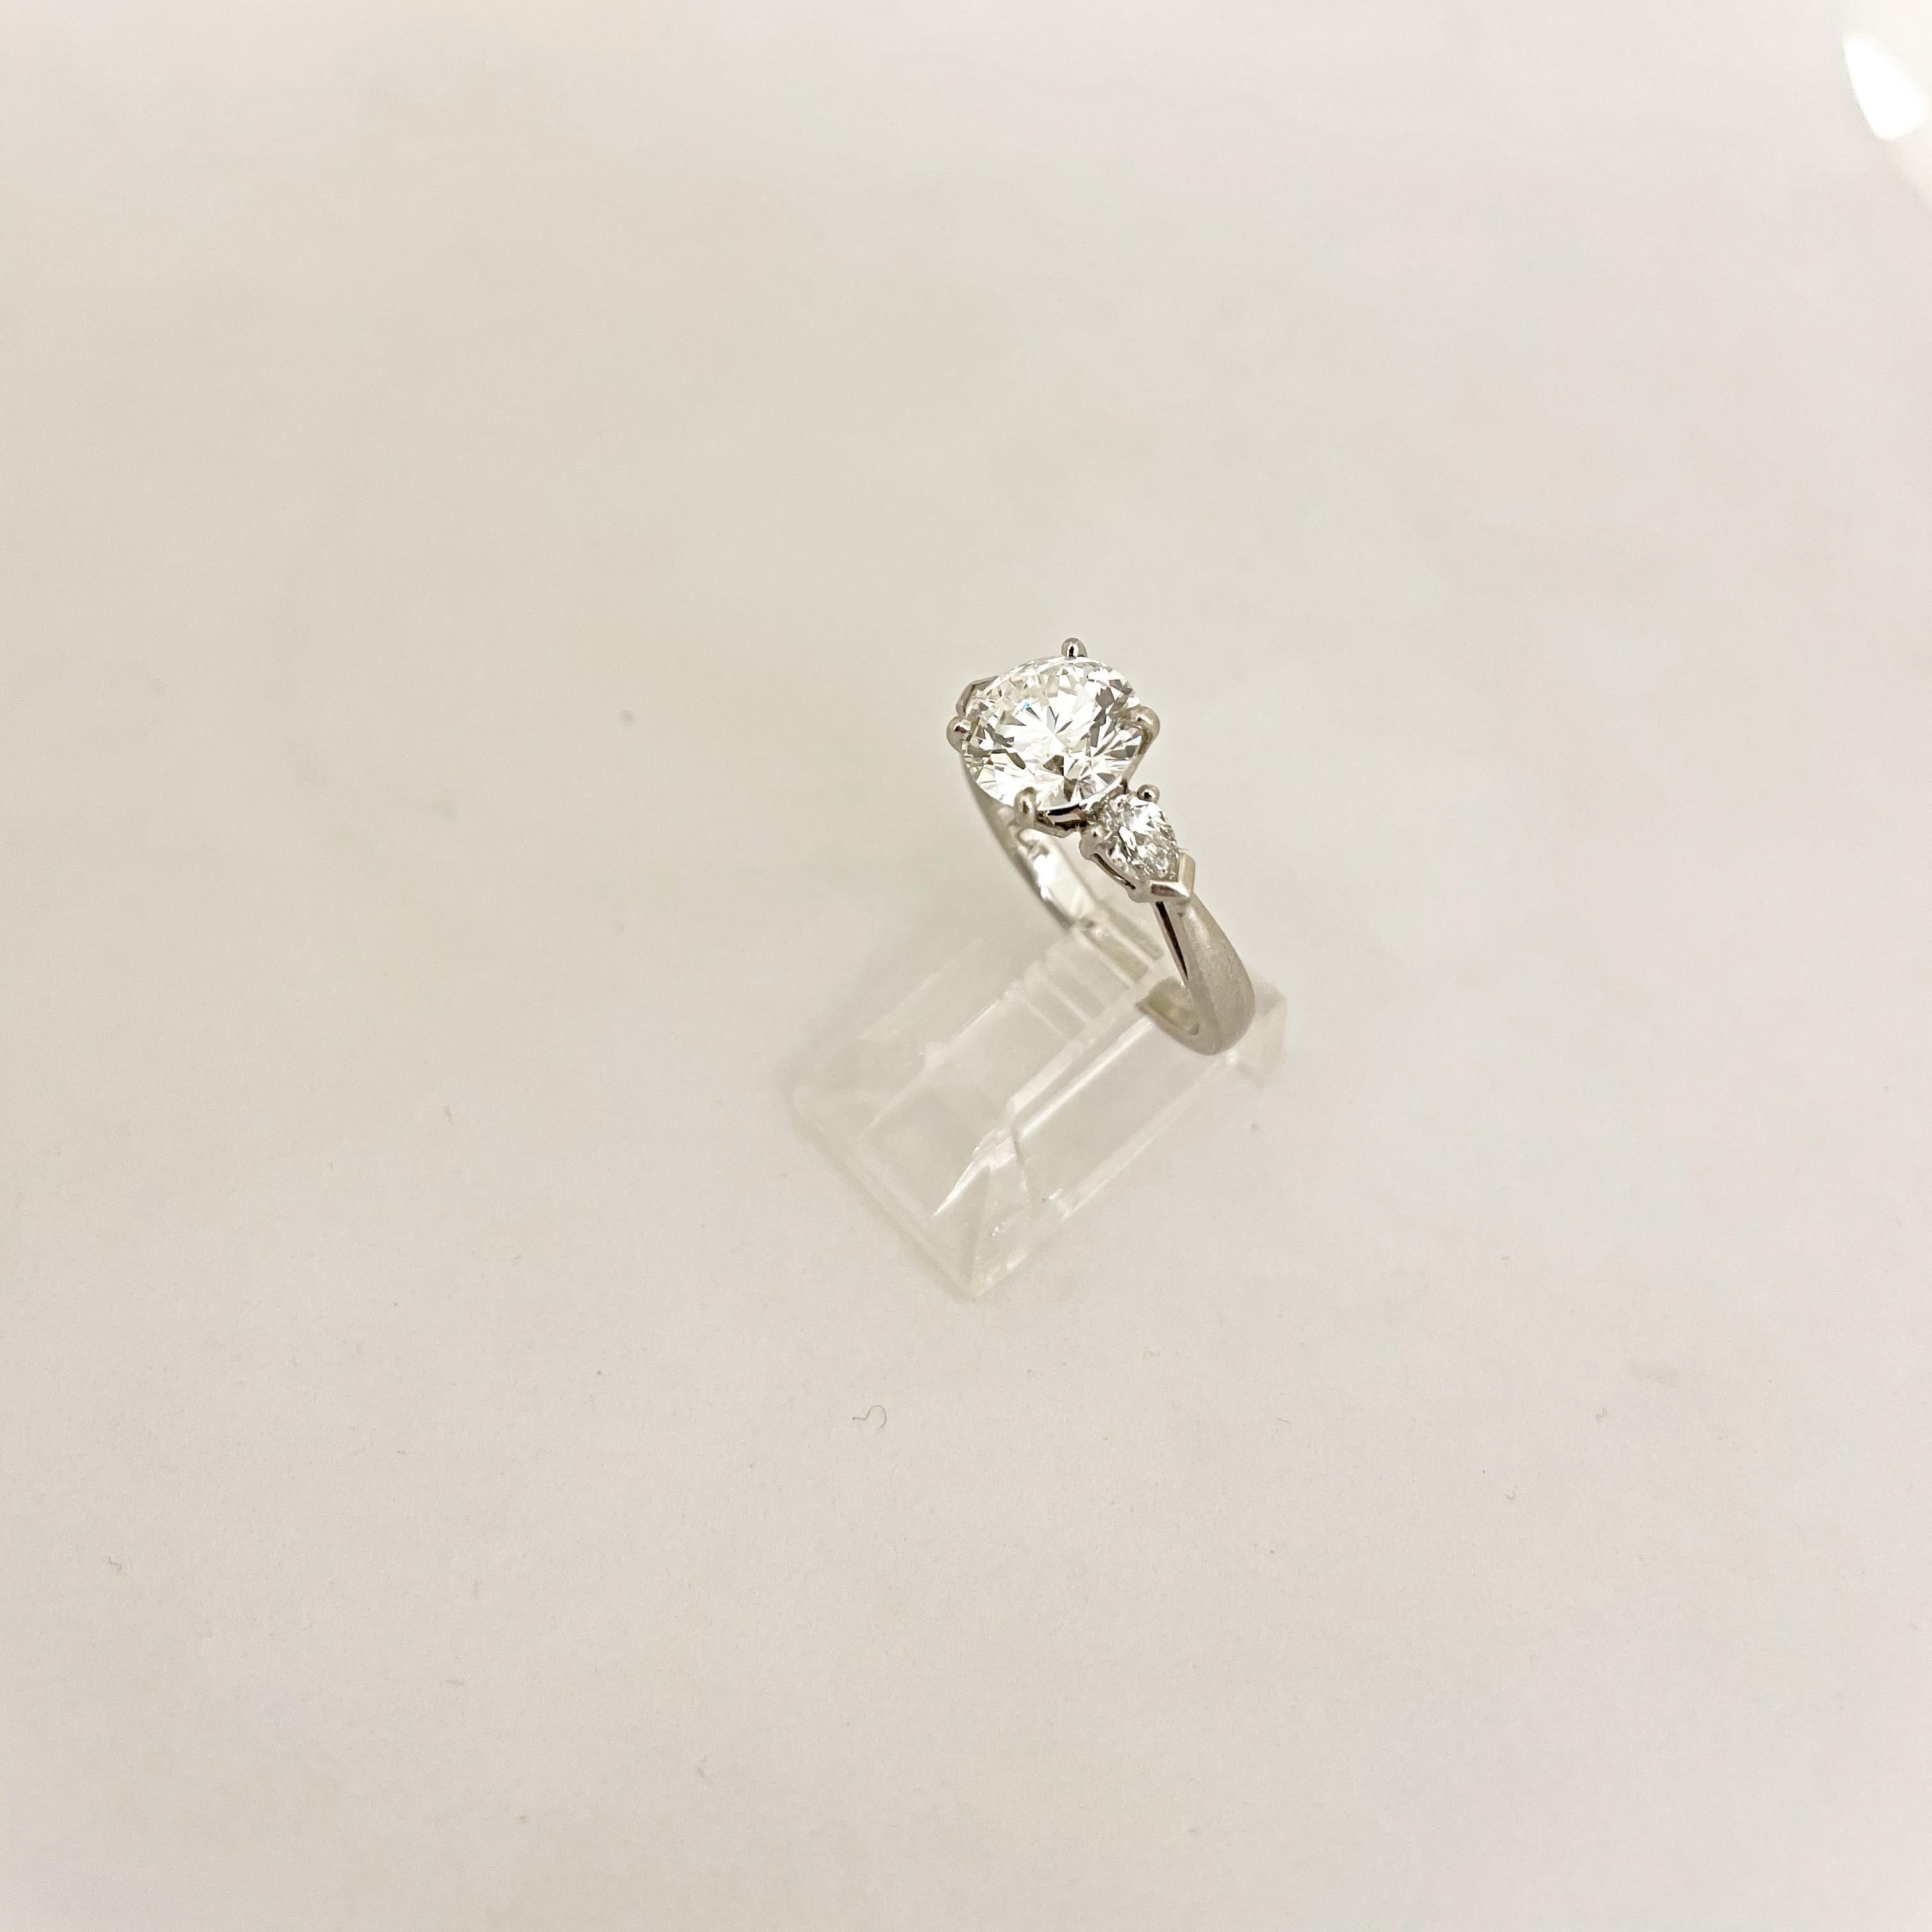 GIA Certified, F Color, VS2 2.07 Carat Round Diamond Ring For Sale 8